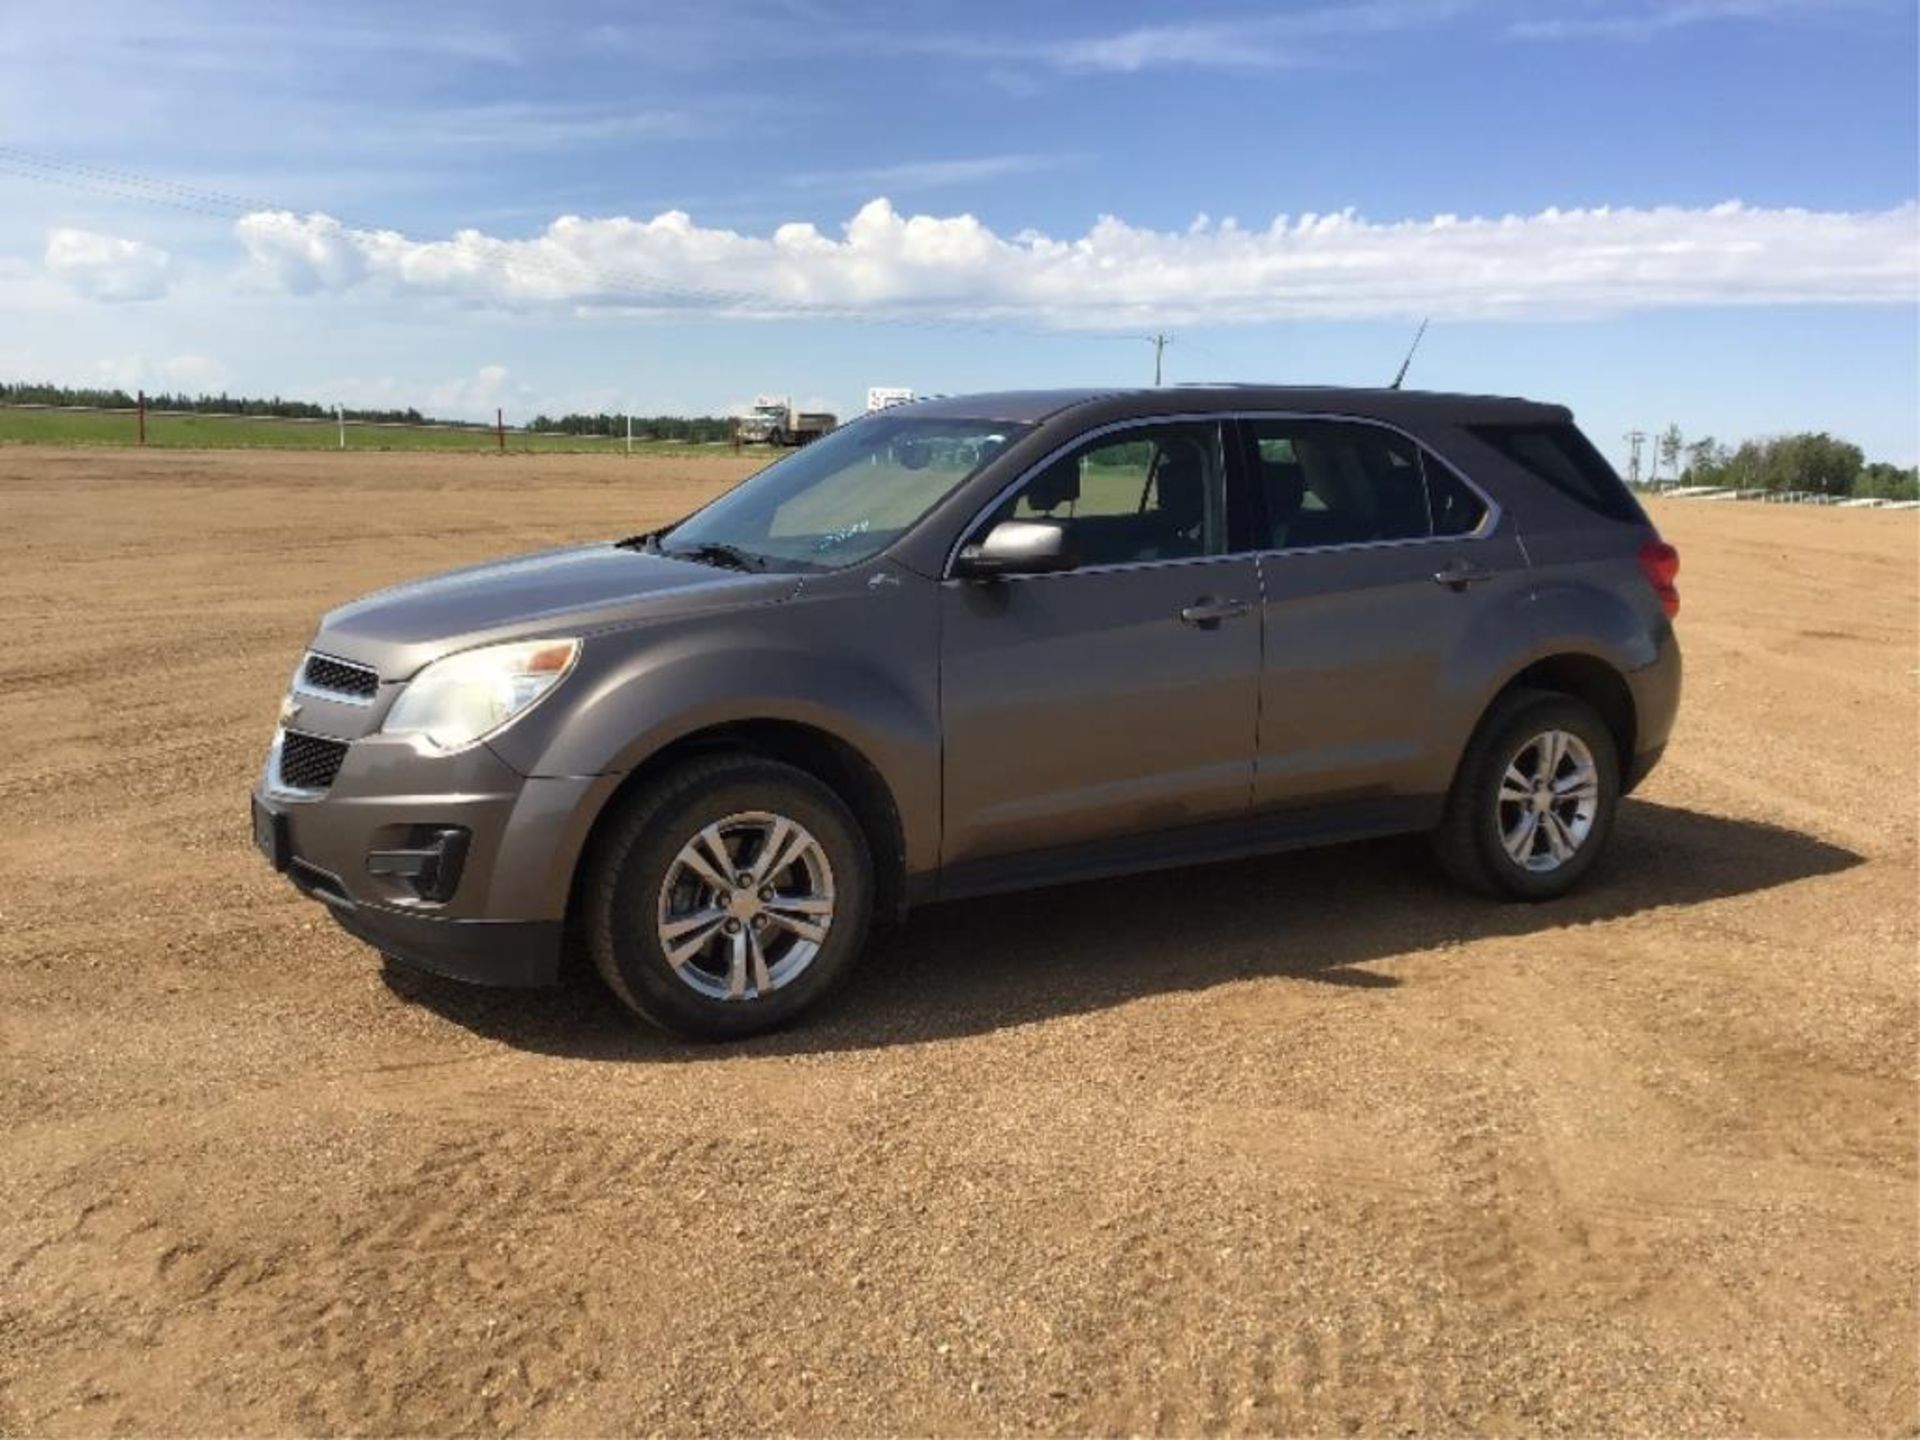 2010 Chevrolet Equinox LS AWD SUV VIN 2CNFLCEW3A6390547 EcoTec Eng, A/T, 105,936km. From the Fort - Image 2 of 10